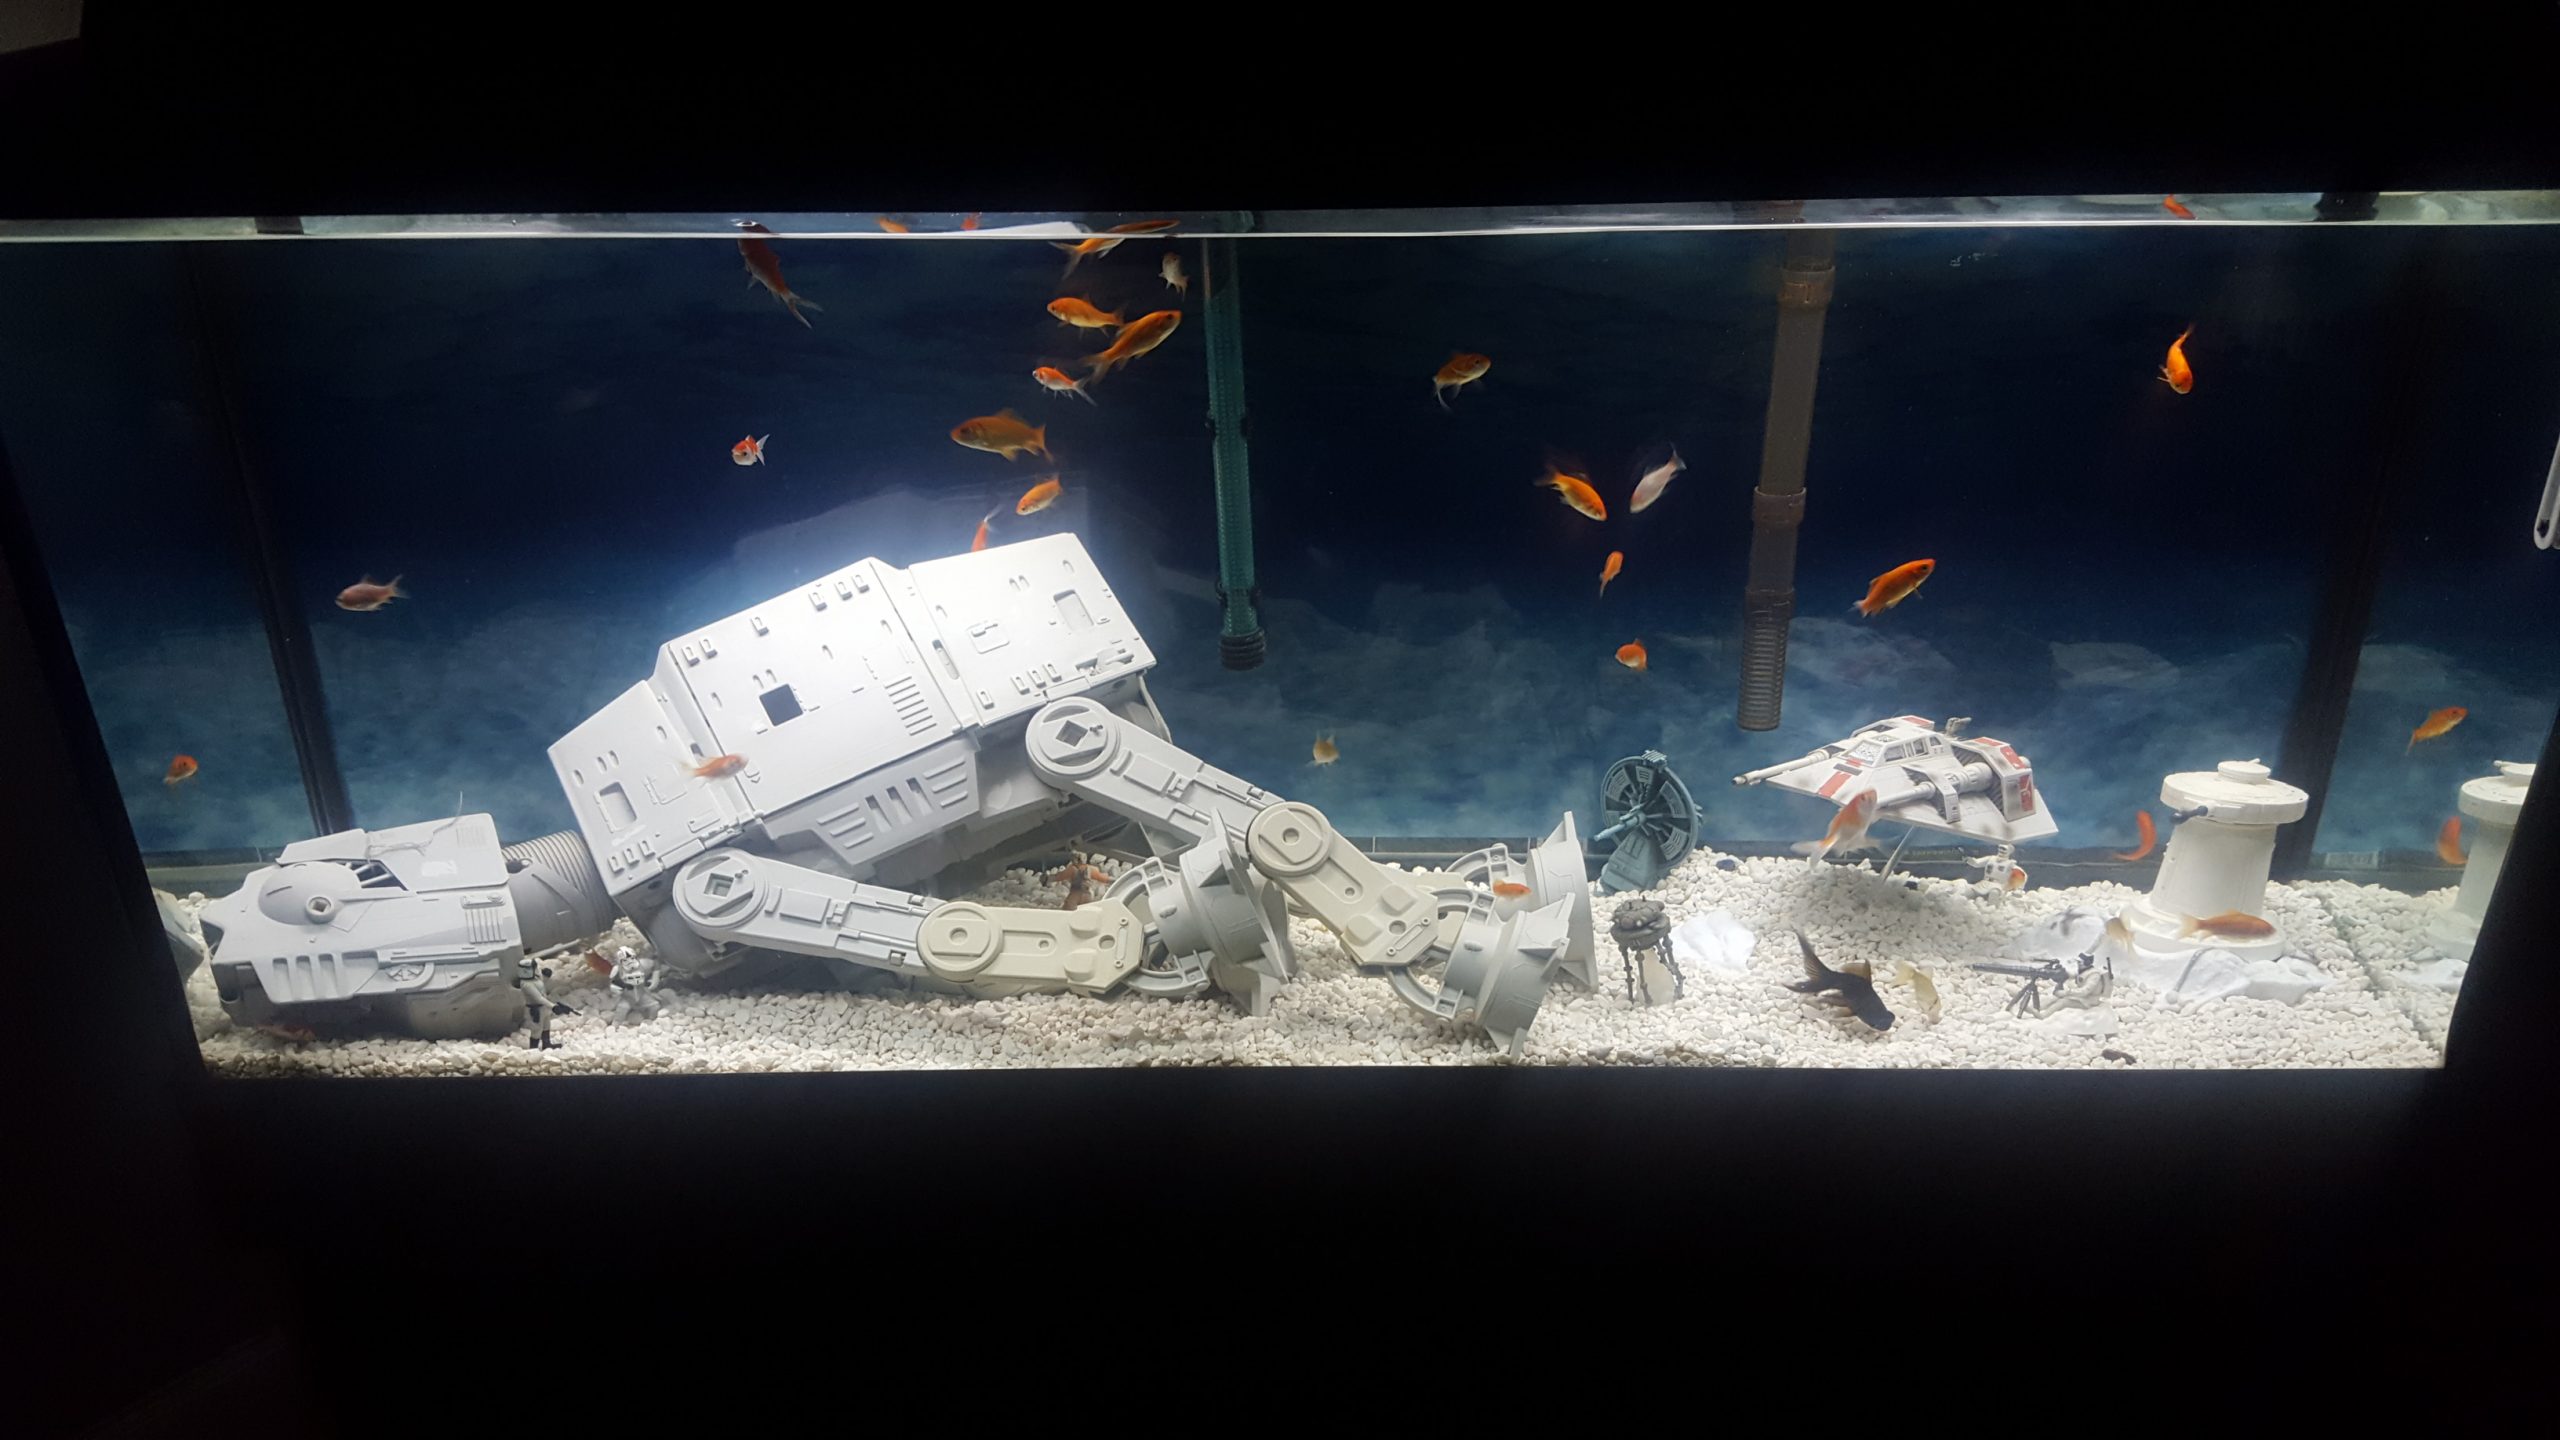 Star Wars Themed Fish Tanks/Vivariums Are The Newest Trend